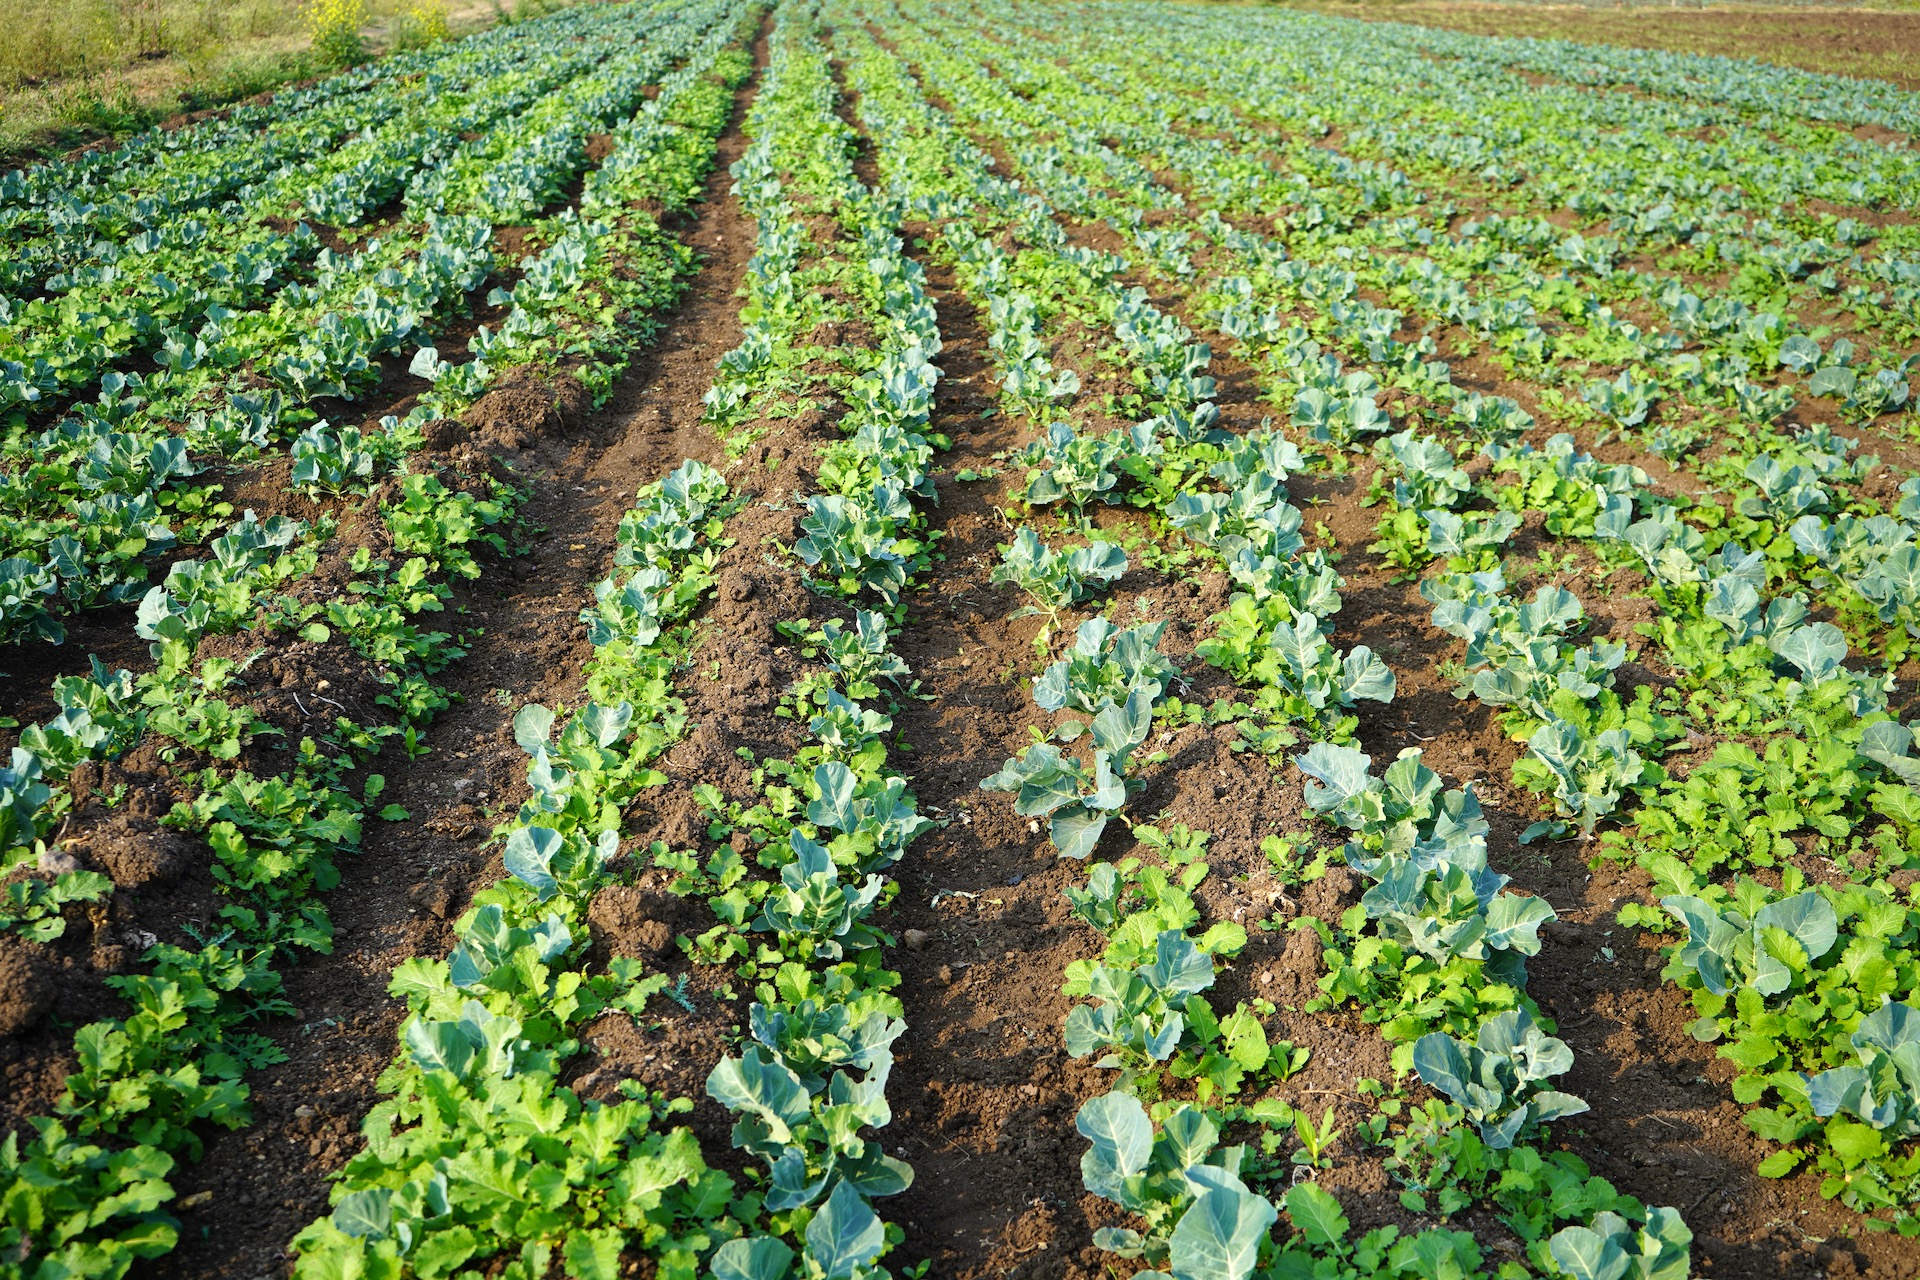 An image of organic crops.